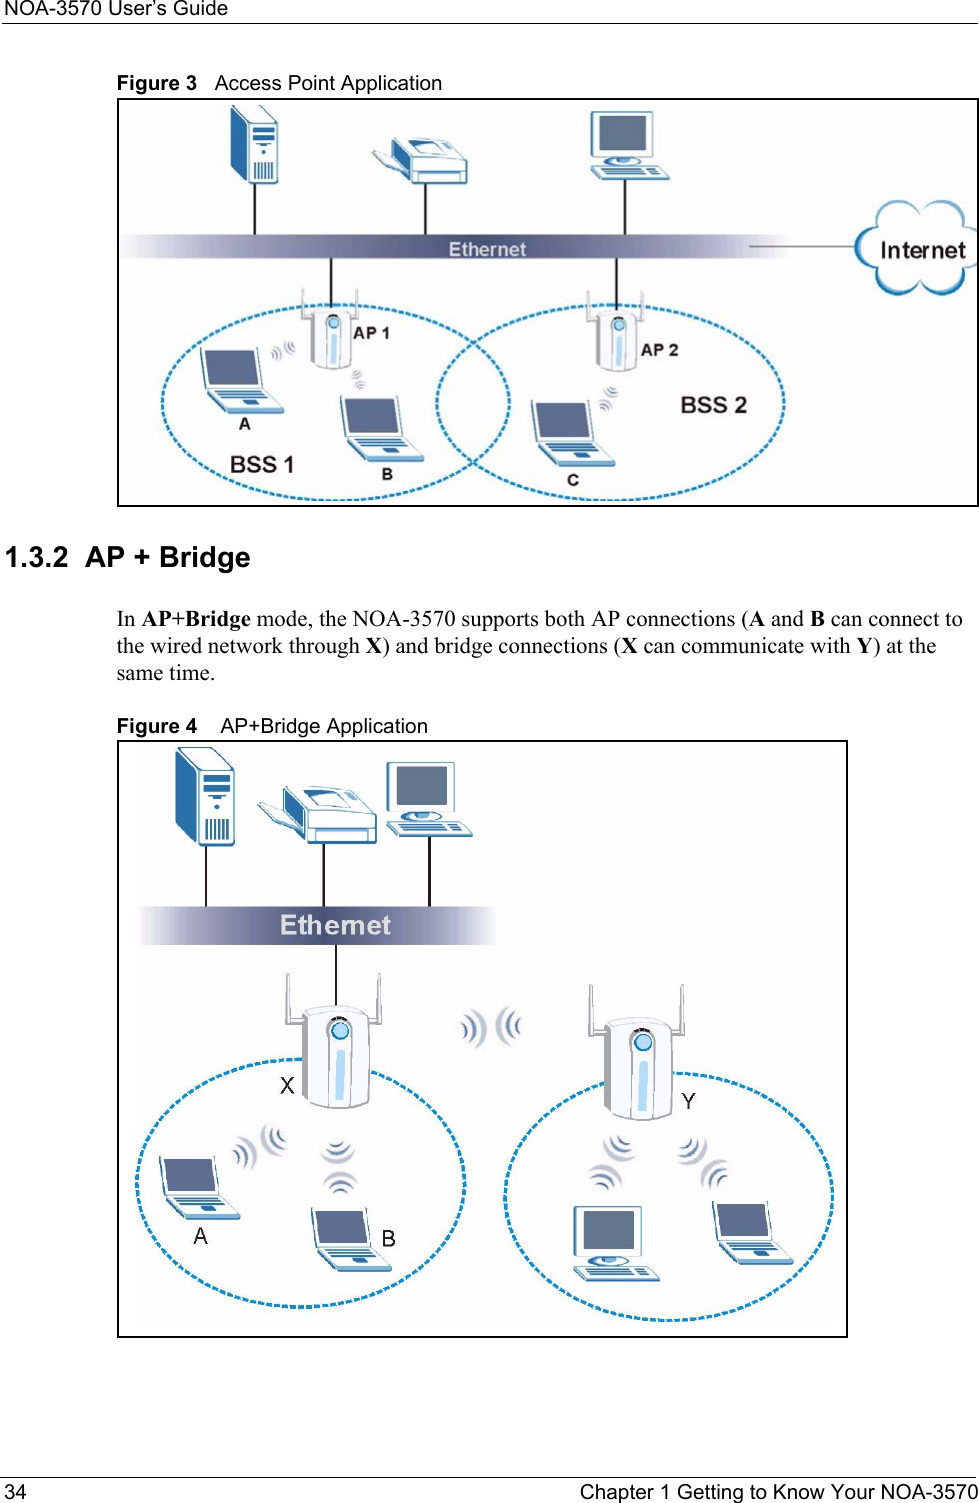 NOA-3570 User’s Guide34 Chapter 1 Getting to Know Your NOA-3570Figure 3   Access Point Application1.3.2  AP + BridgeIn AP+Bridge mode, the NOA-3570 supports both AP connections (A and B can connect to the wired network through X) and bridge connections (X can communicate with Y) at the same time.Figure 4    AP+Bridge Application 